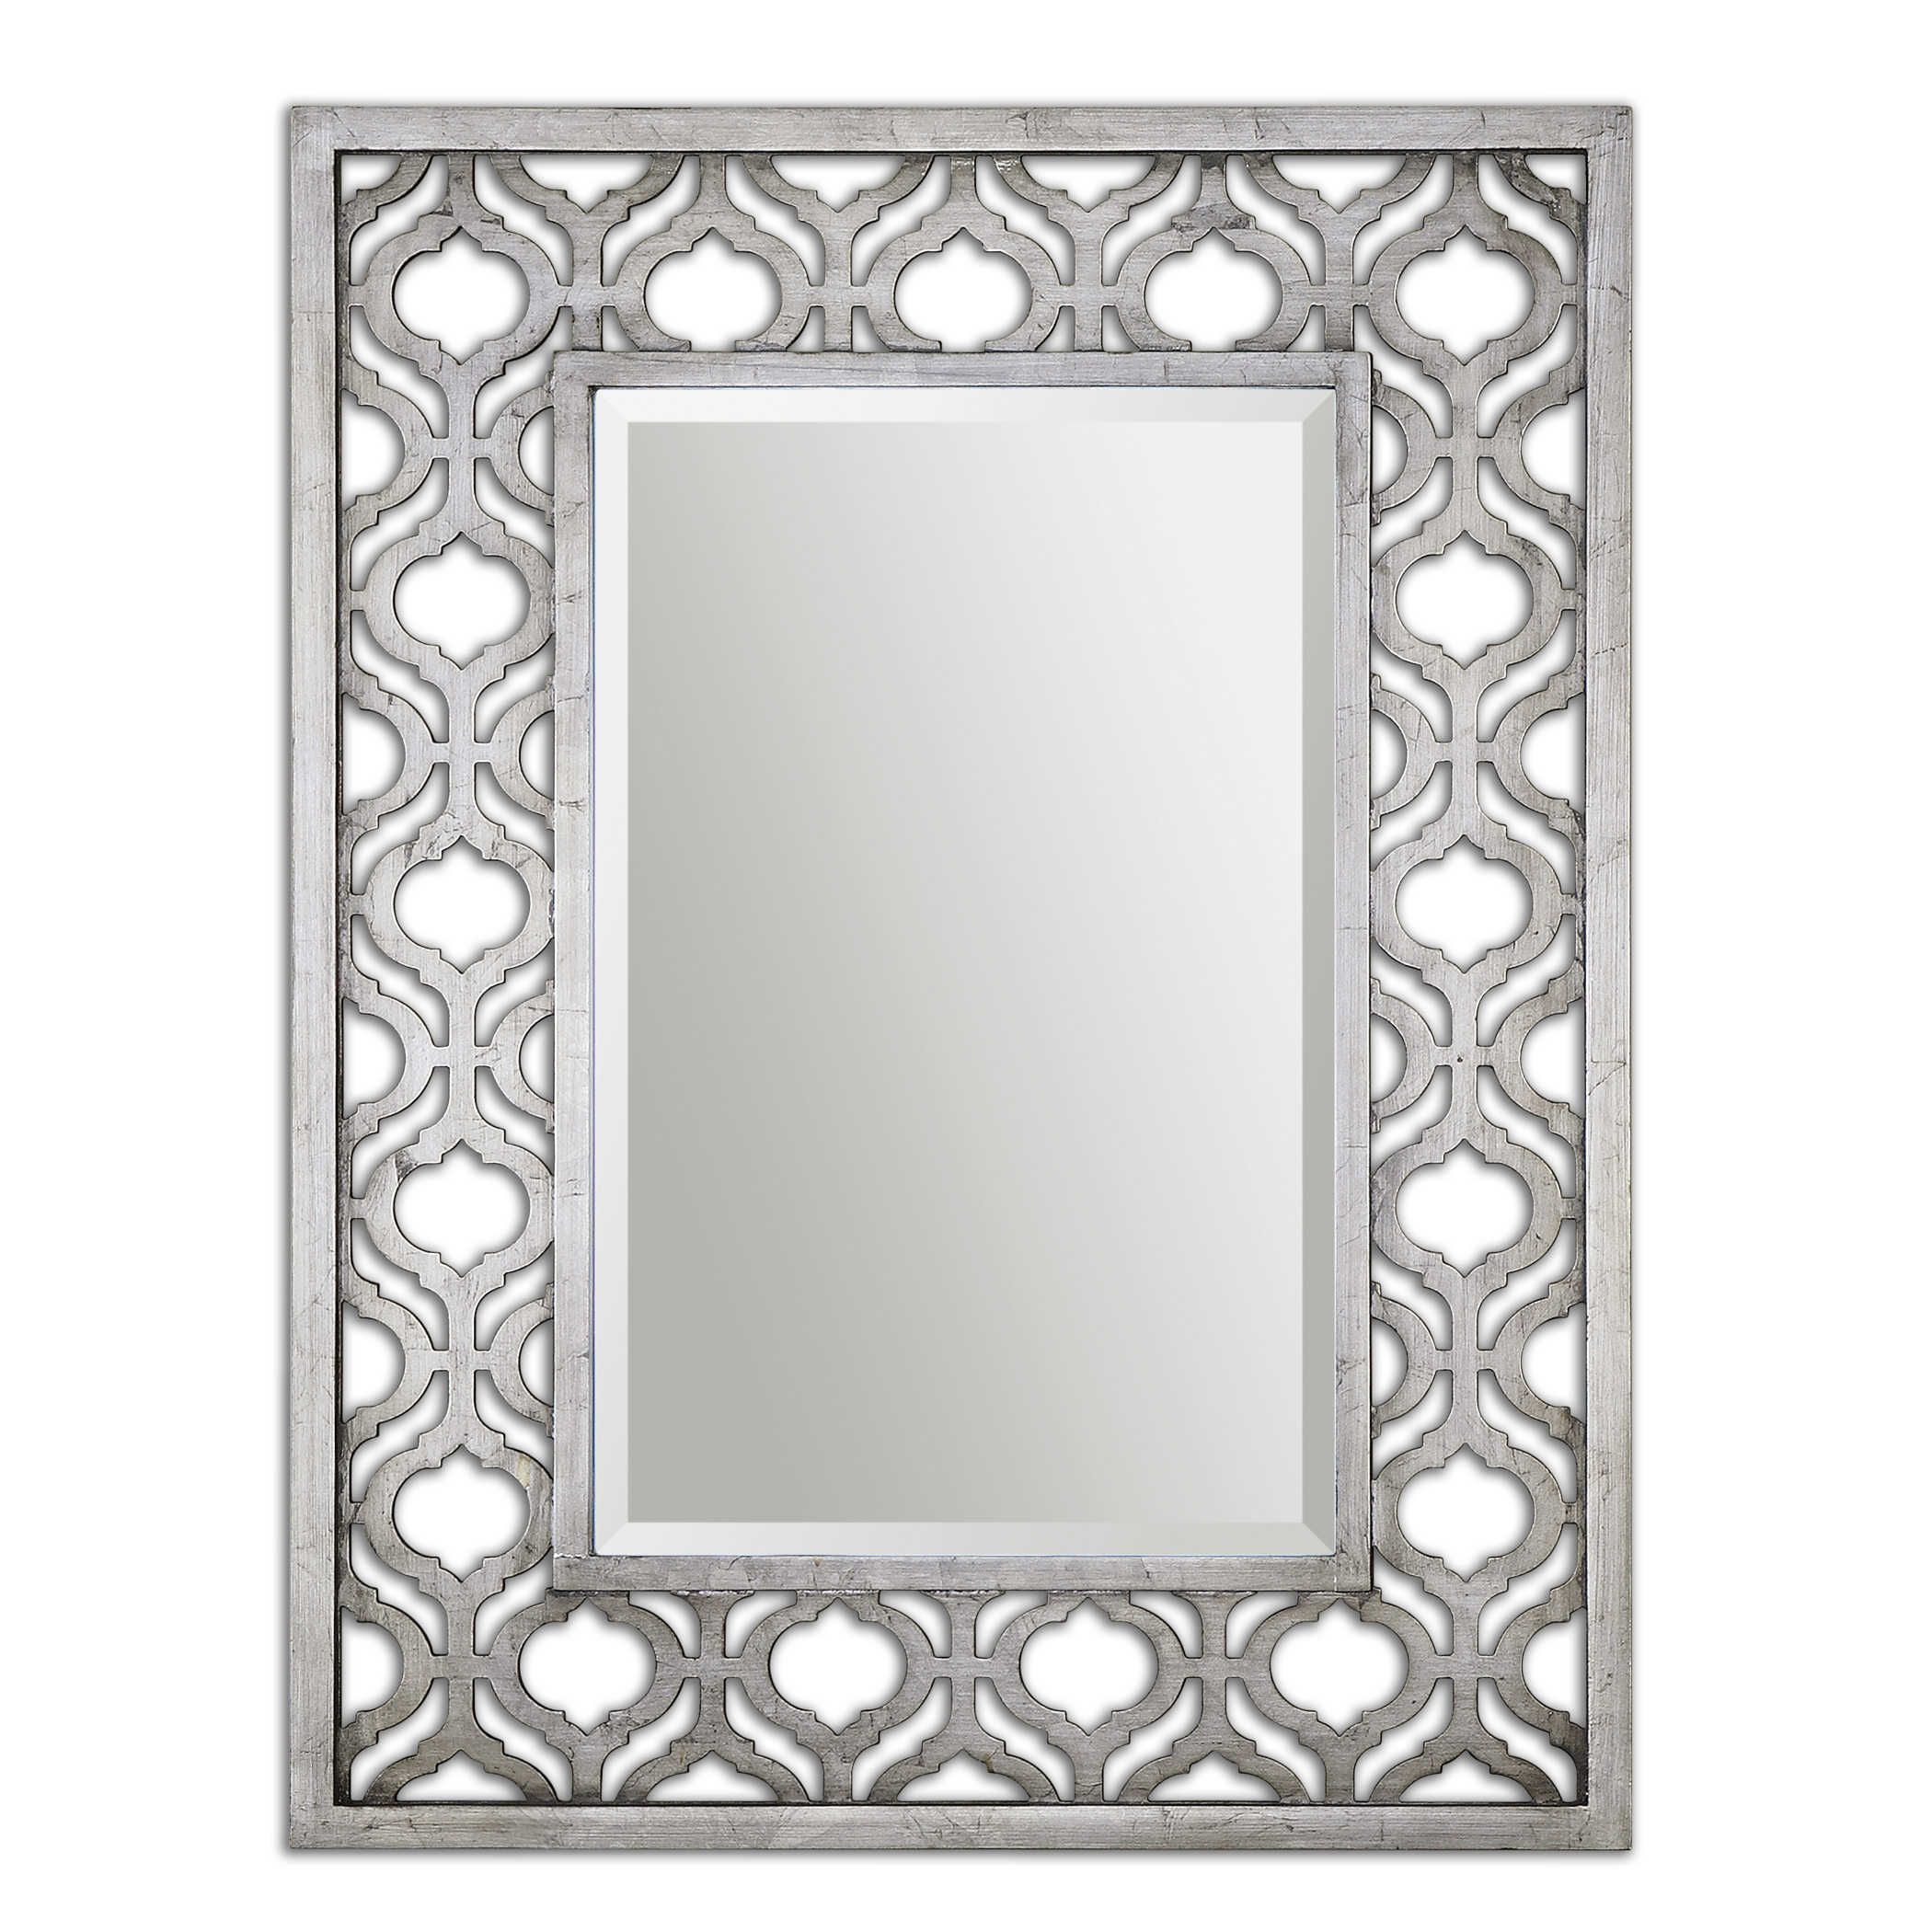 Decorative Antiqued Silver Leaf With Black Wall Mirror Large 40" Vanity Within Silver Decorative Wall Mirrors (View 3 of 15)